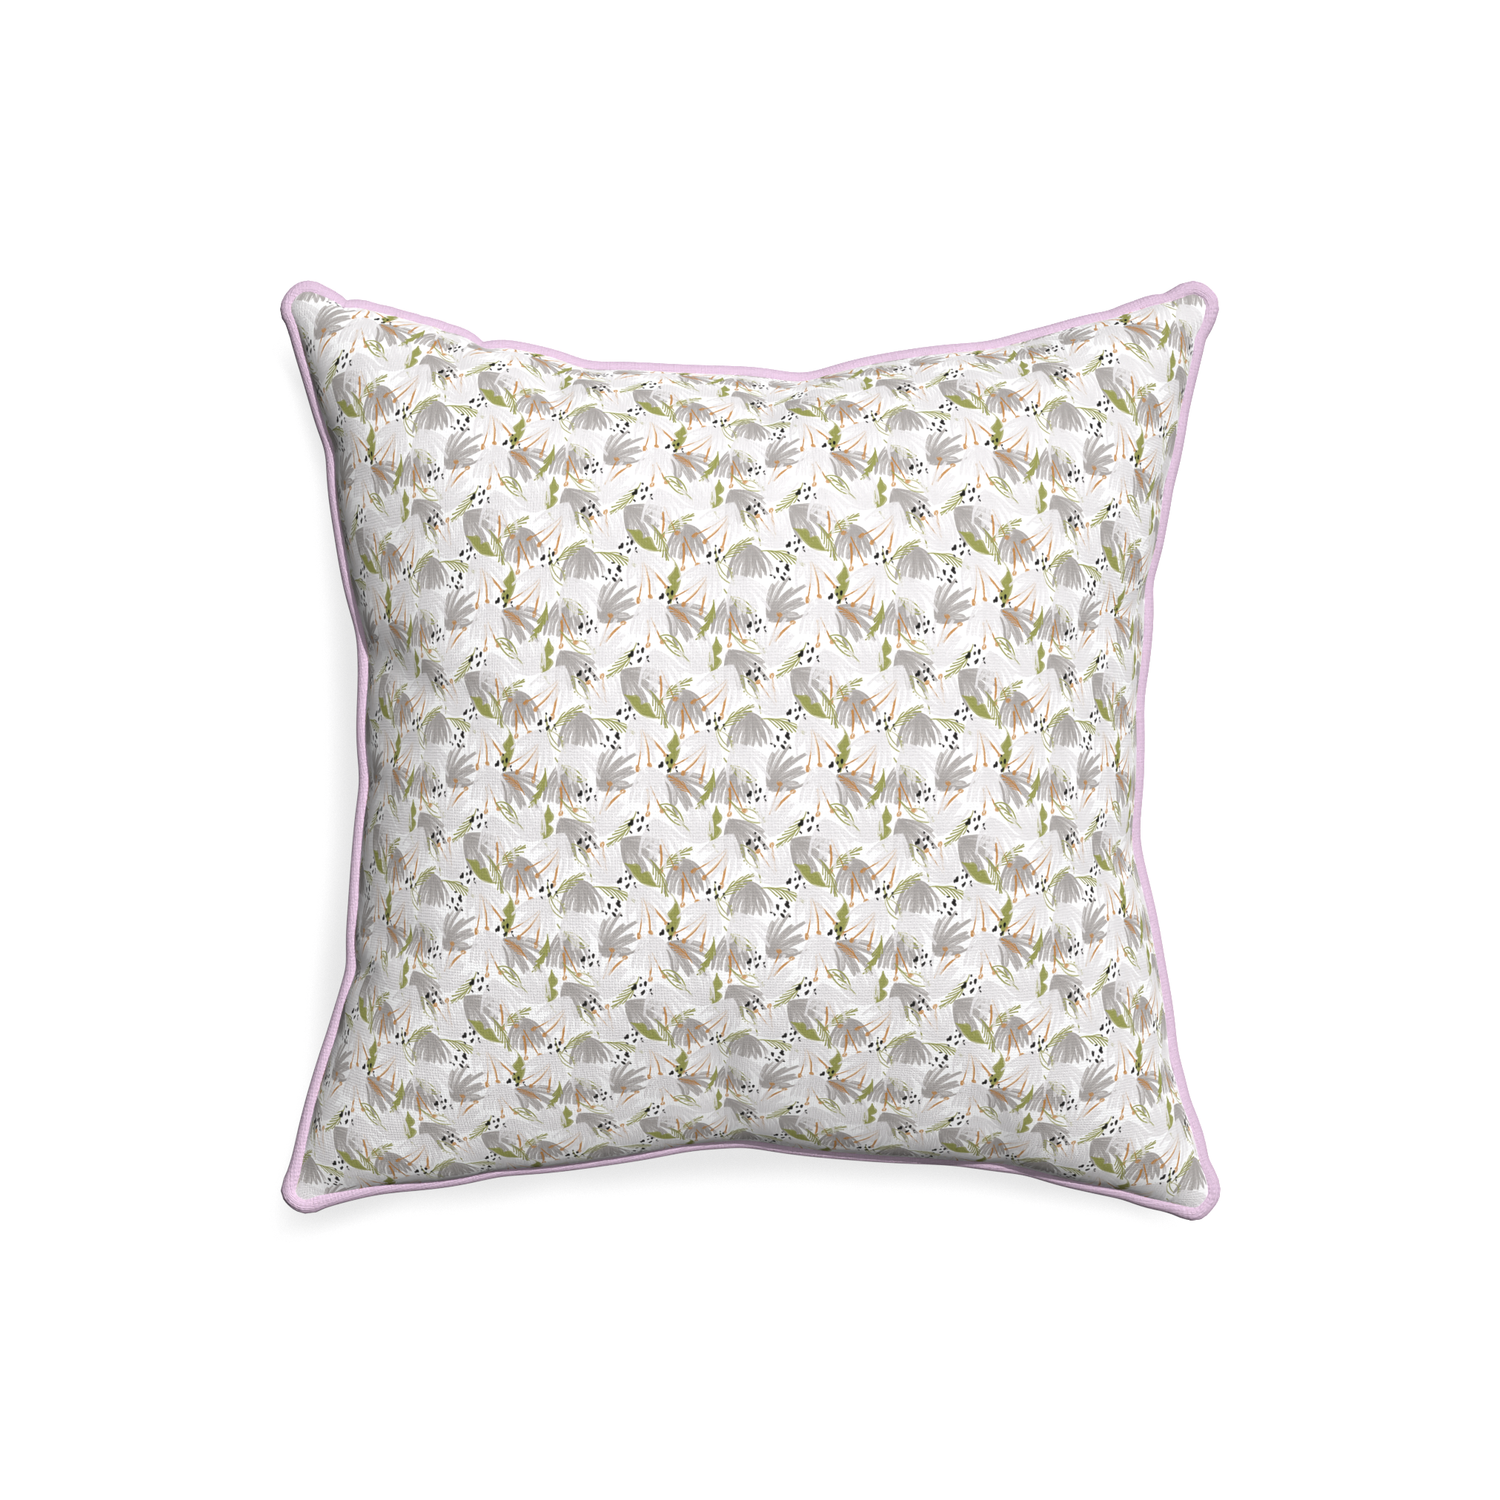 20-square eden grey custom pillow with l piping on white background